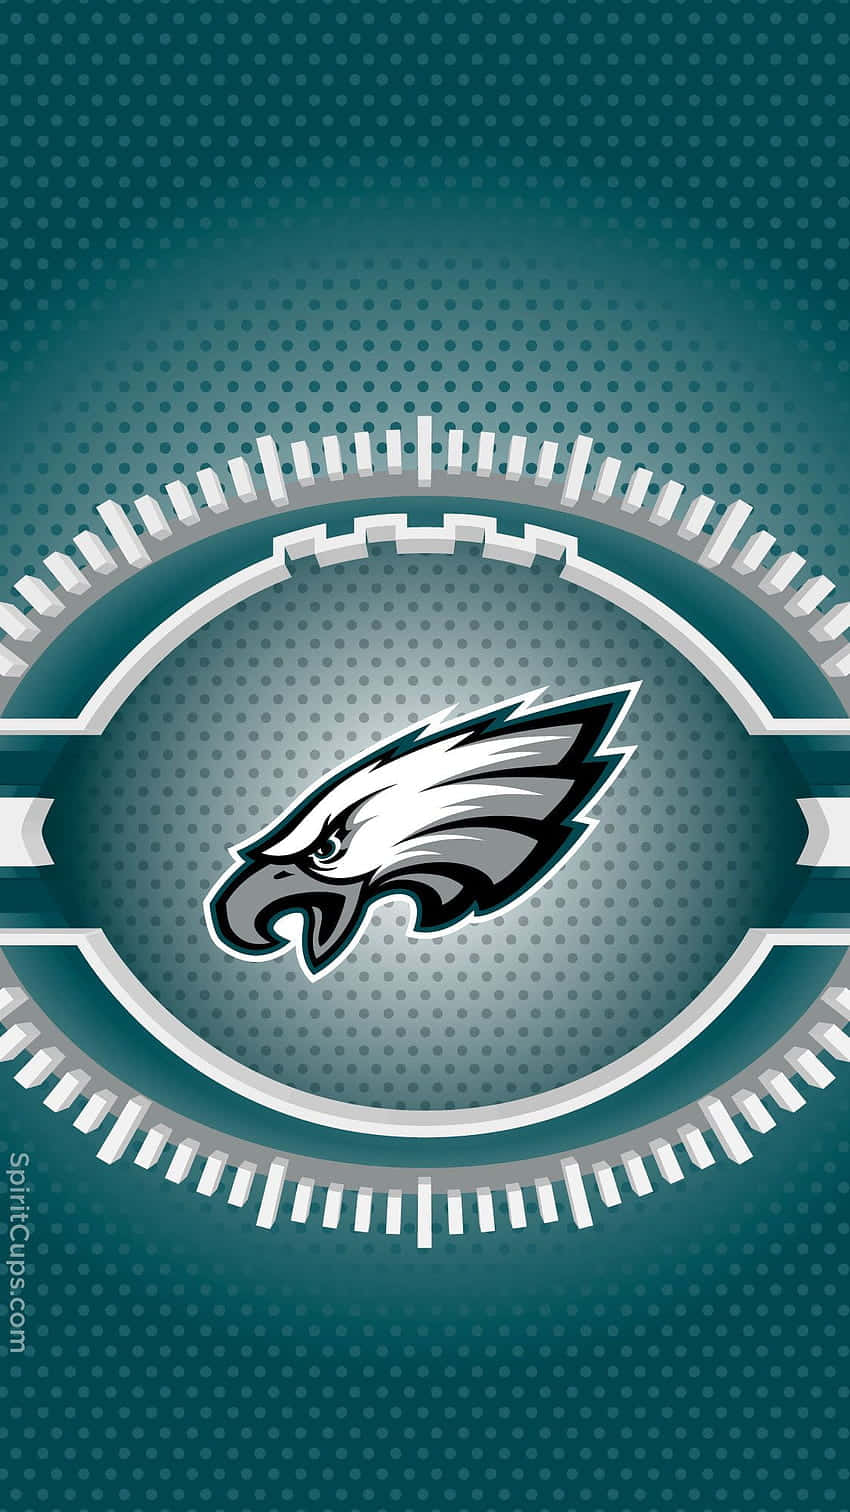 Fly Eagles Fly On Your Philadelphia Eagles IPhone Wallpaper